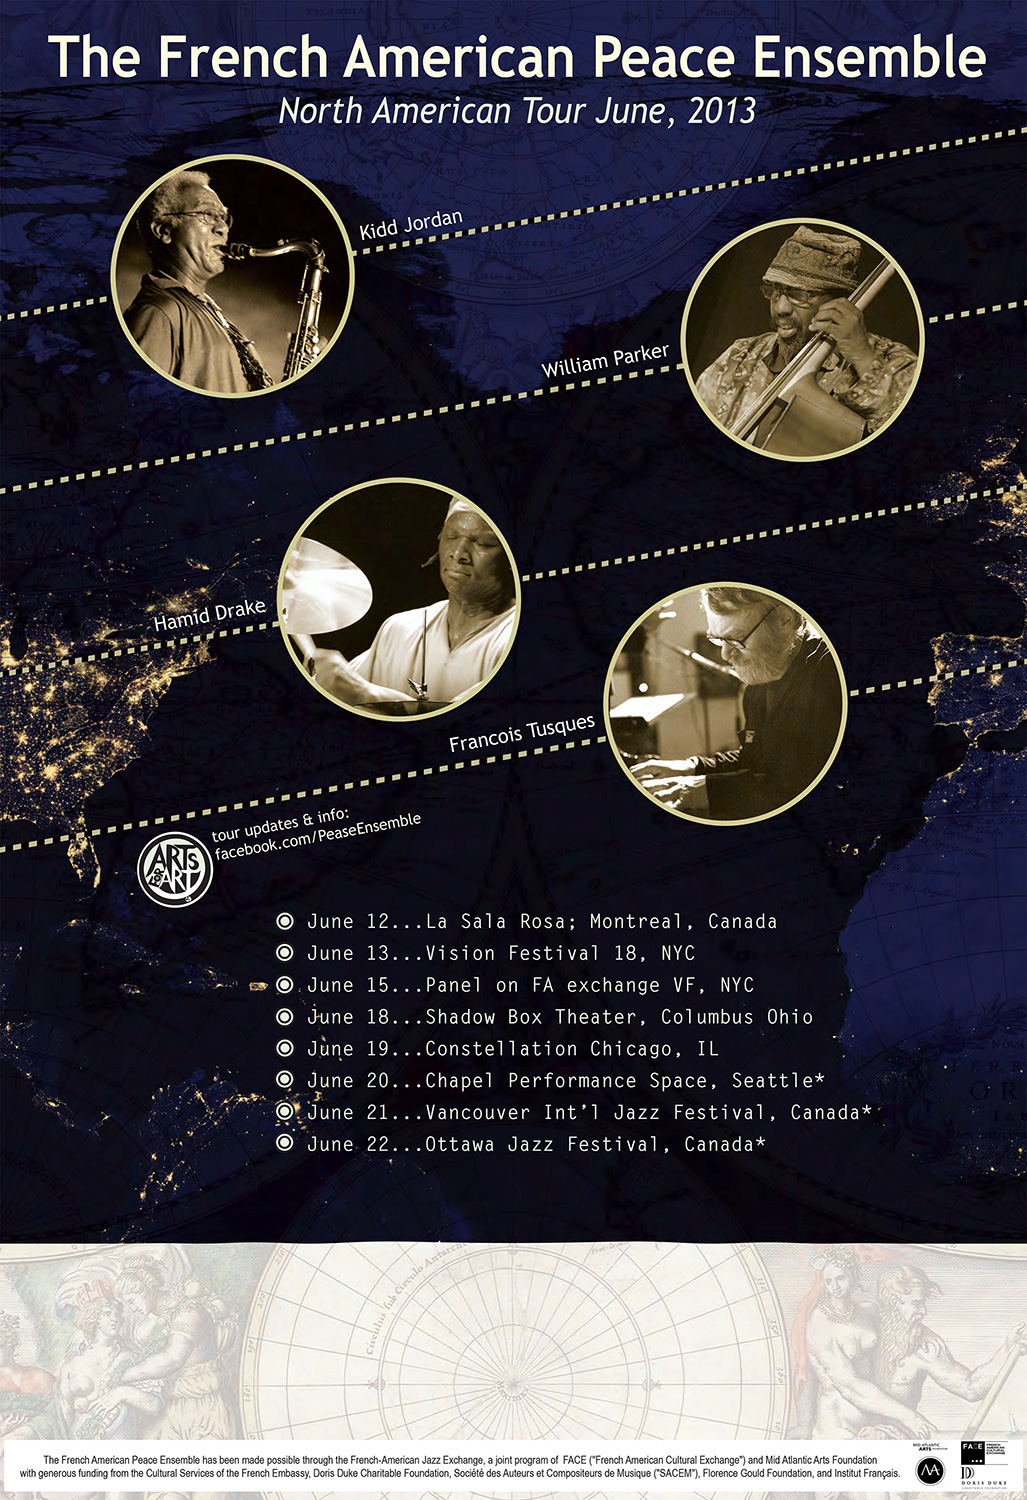 Poster for the French American Peace Ensemble 2013 tour